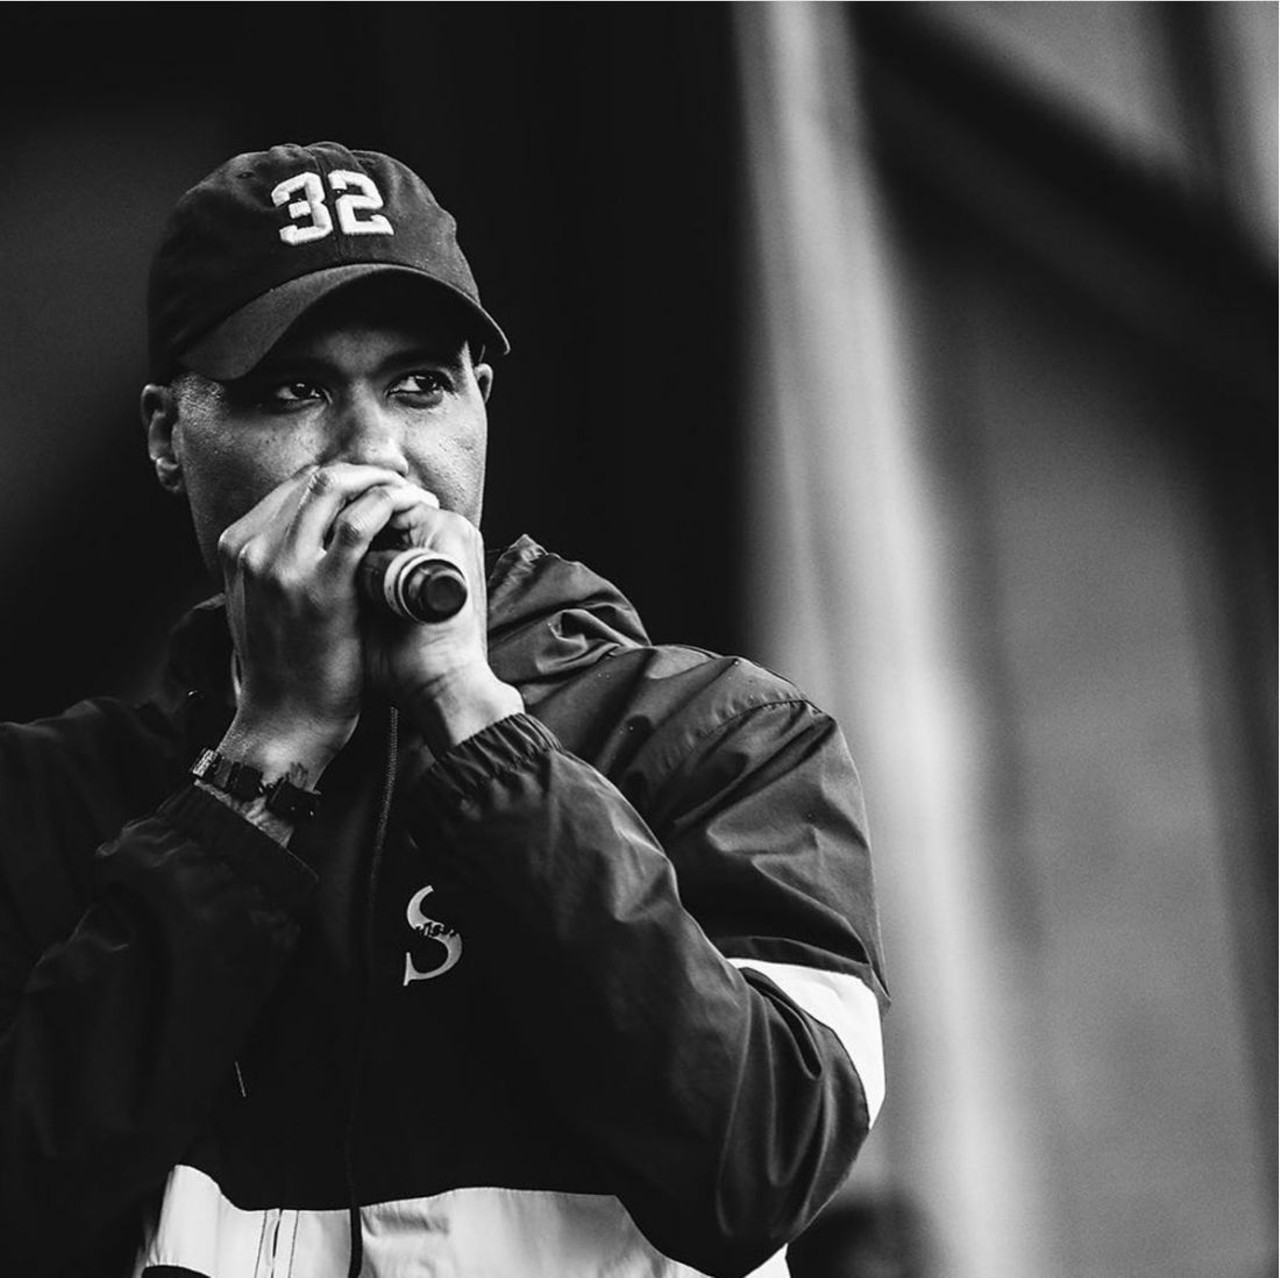  "All Girl Crazy," by Dom Kennedy 
On "All Girl Crazy," Dom raps about how much he loves females, especially from the Midwest. "I fuck with Ohio, It's ladies in Cleveland."
Photo via dopeitsdom/Instagram